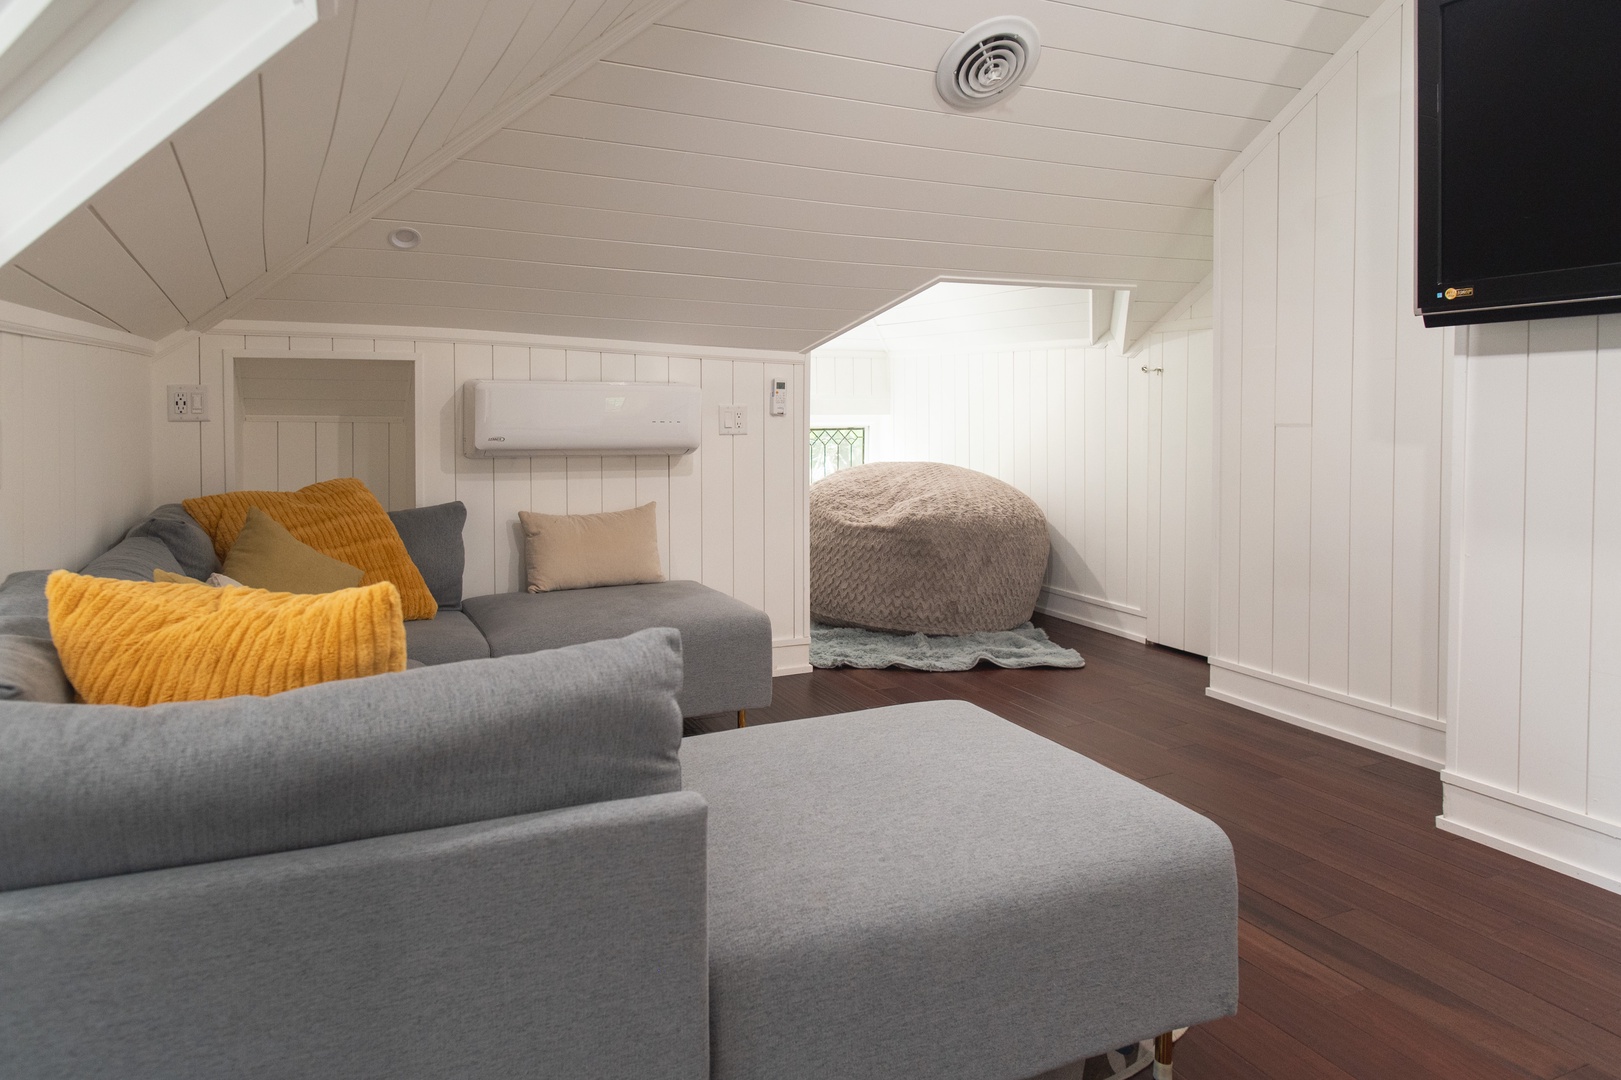 The main house’s loft area offers a Smart TV, reading nook, & full bathroom